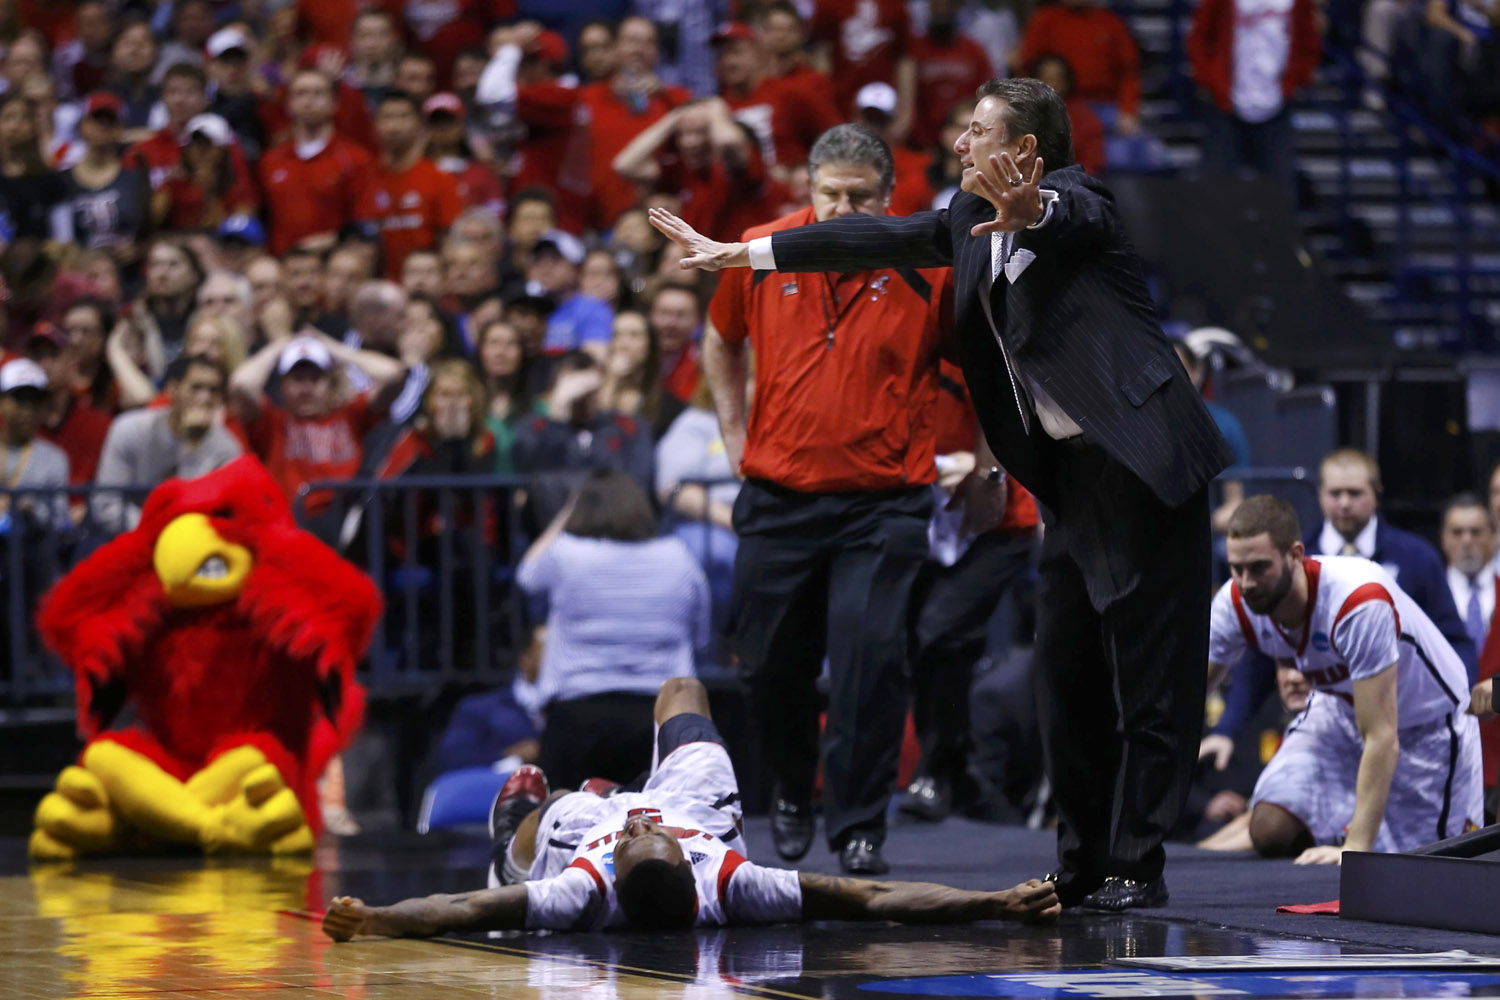 Louisville coach Pitino calls to the referees to stop the game as guard Kevin Ware lays on the court against Duke during their Midwest Regional NCAA men's basketball game in Indianapolis